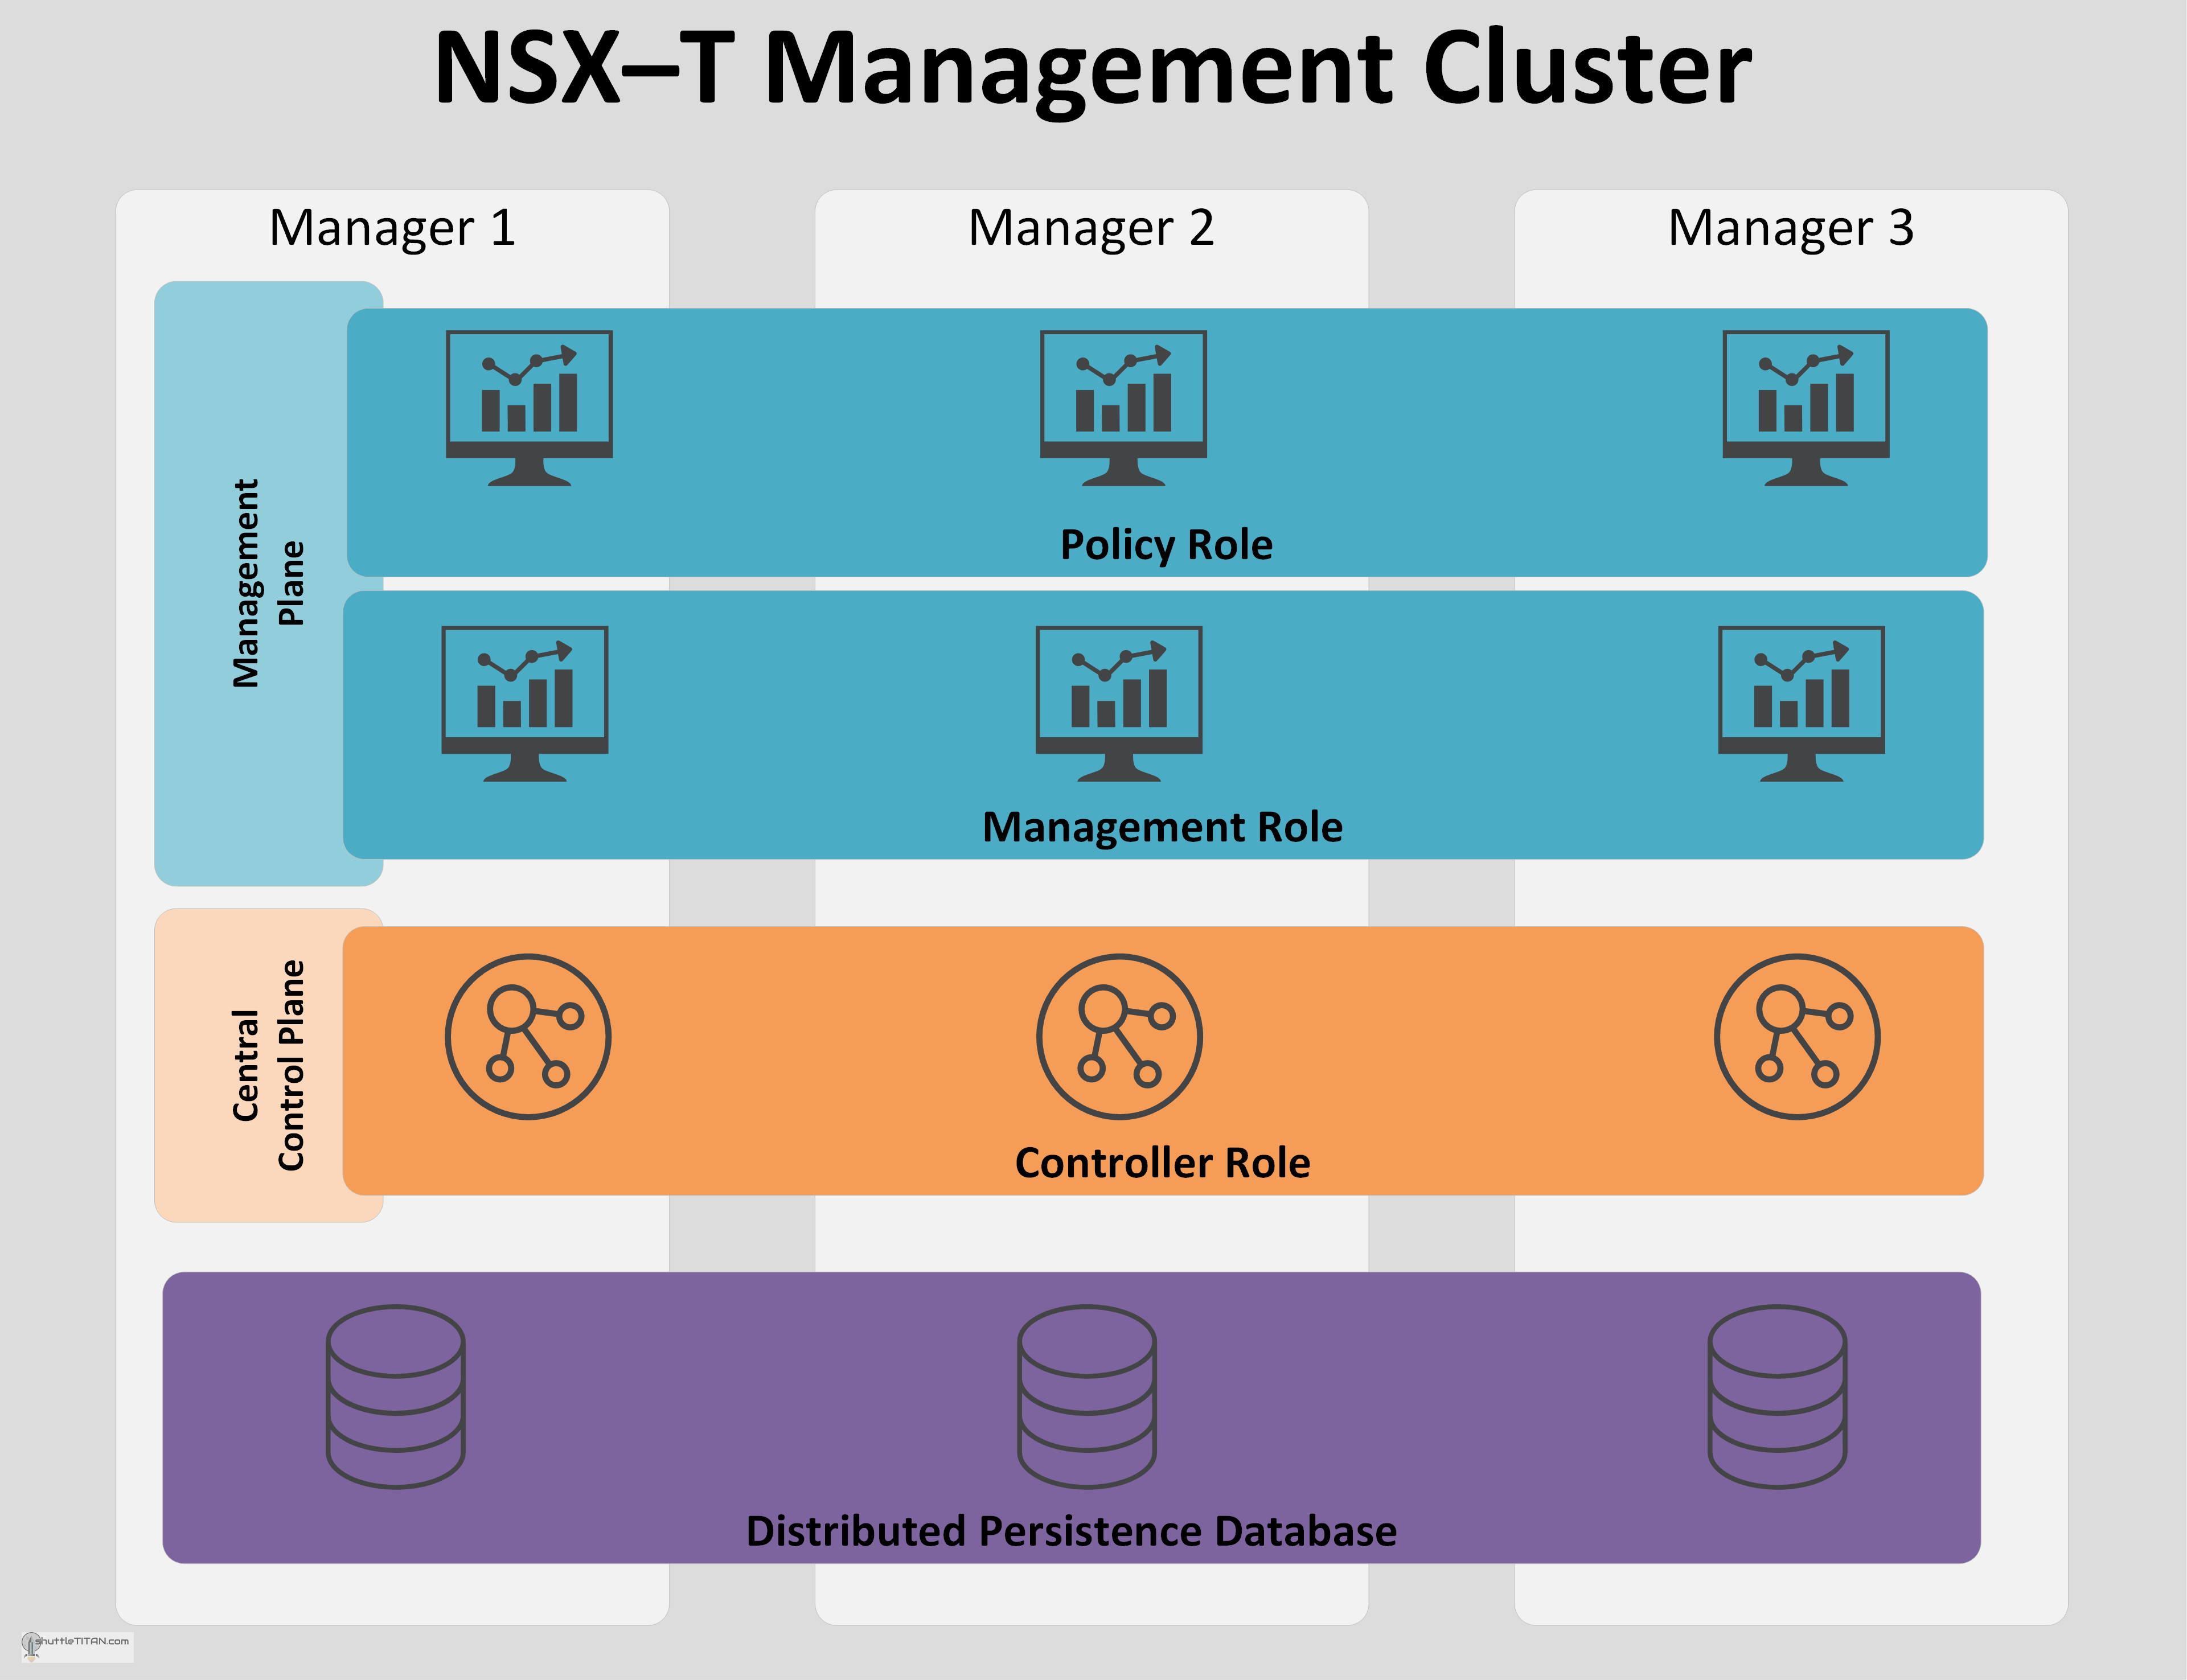 NSX-T Management Cluster: Benefits, Roles, CCP Sharding and failure handling